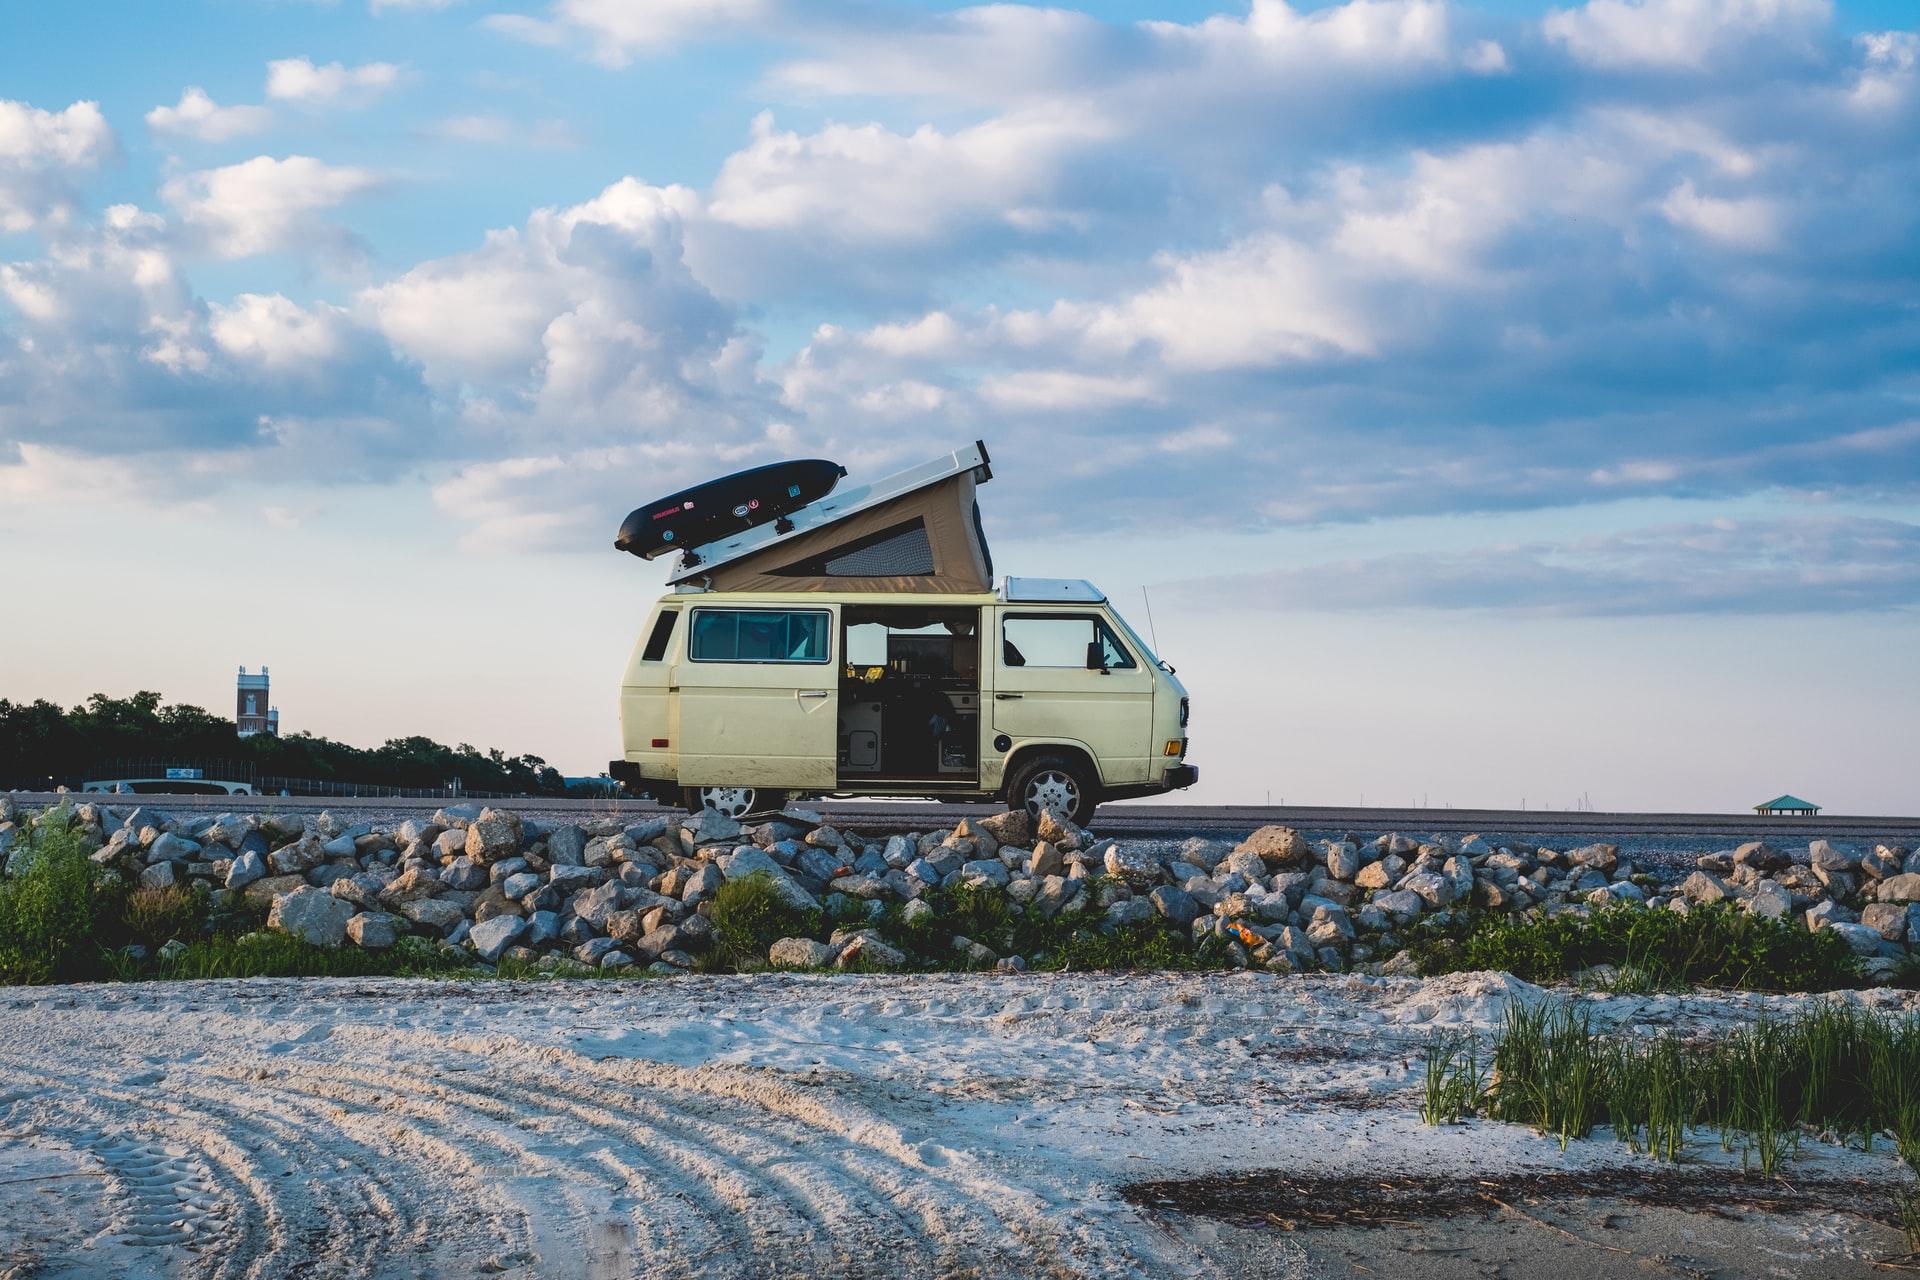 The National Geographic Adventure calls the SylvanSport GO the “Coolest. Camper. Ever.”